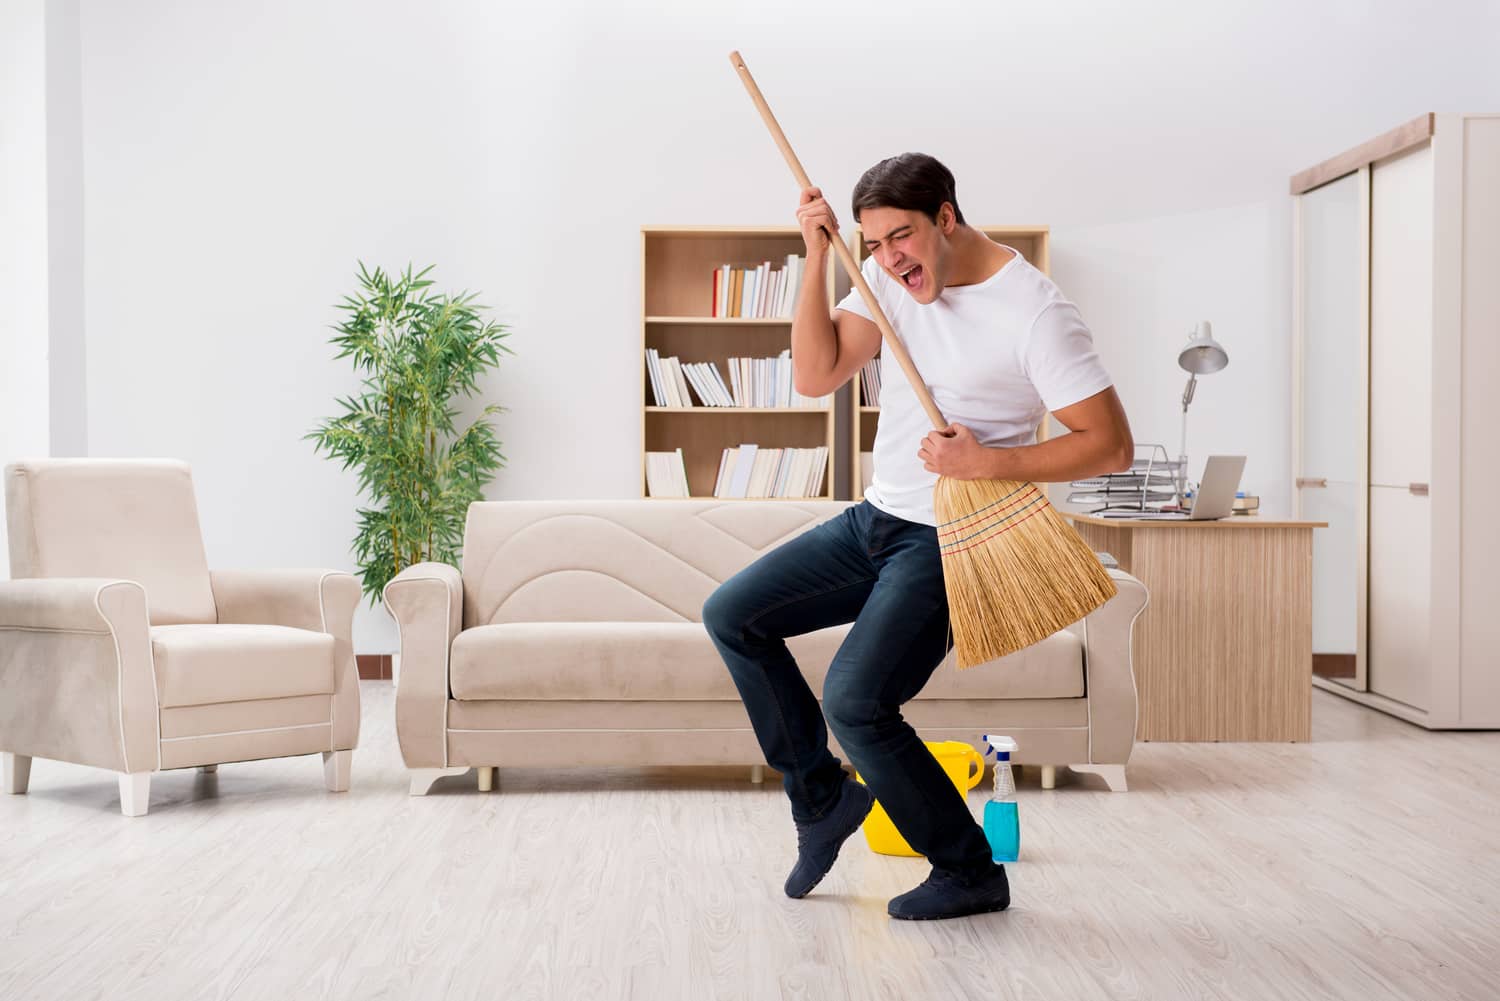 Can You Score Better Than 80% On This 24-Question English Quiz on Your First Try? Cleaning broom sweep housework chores